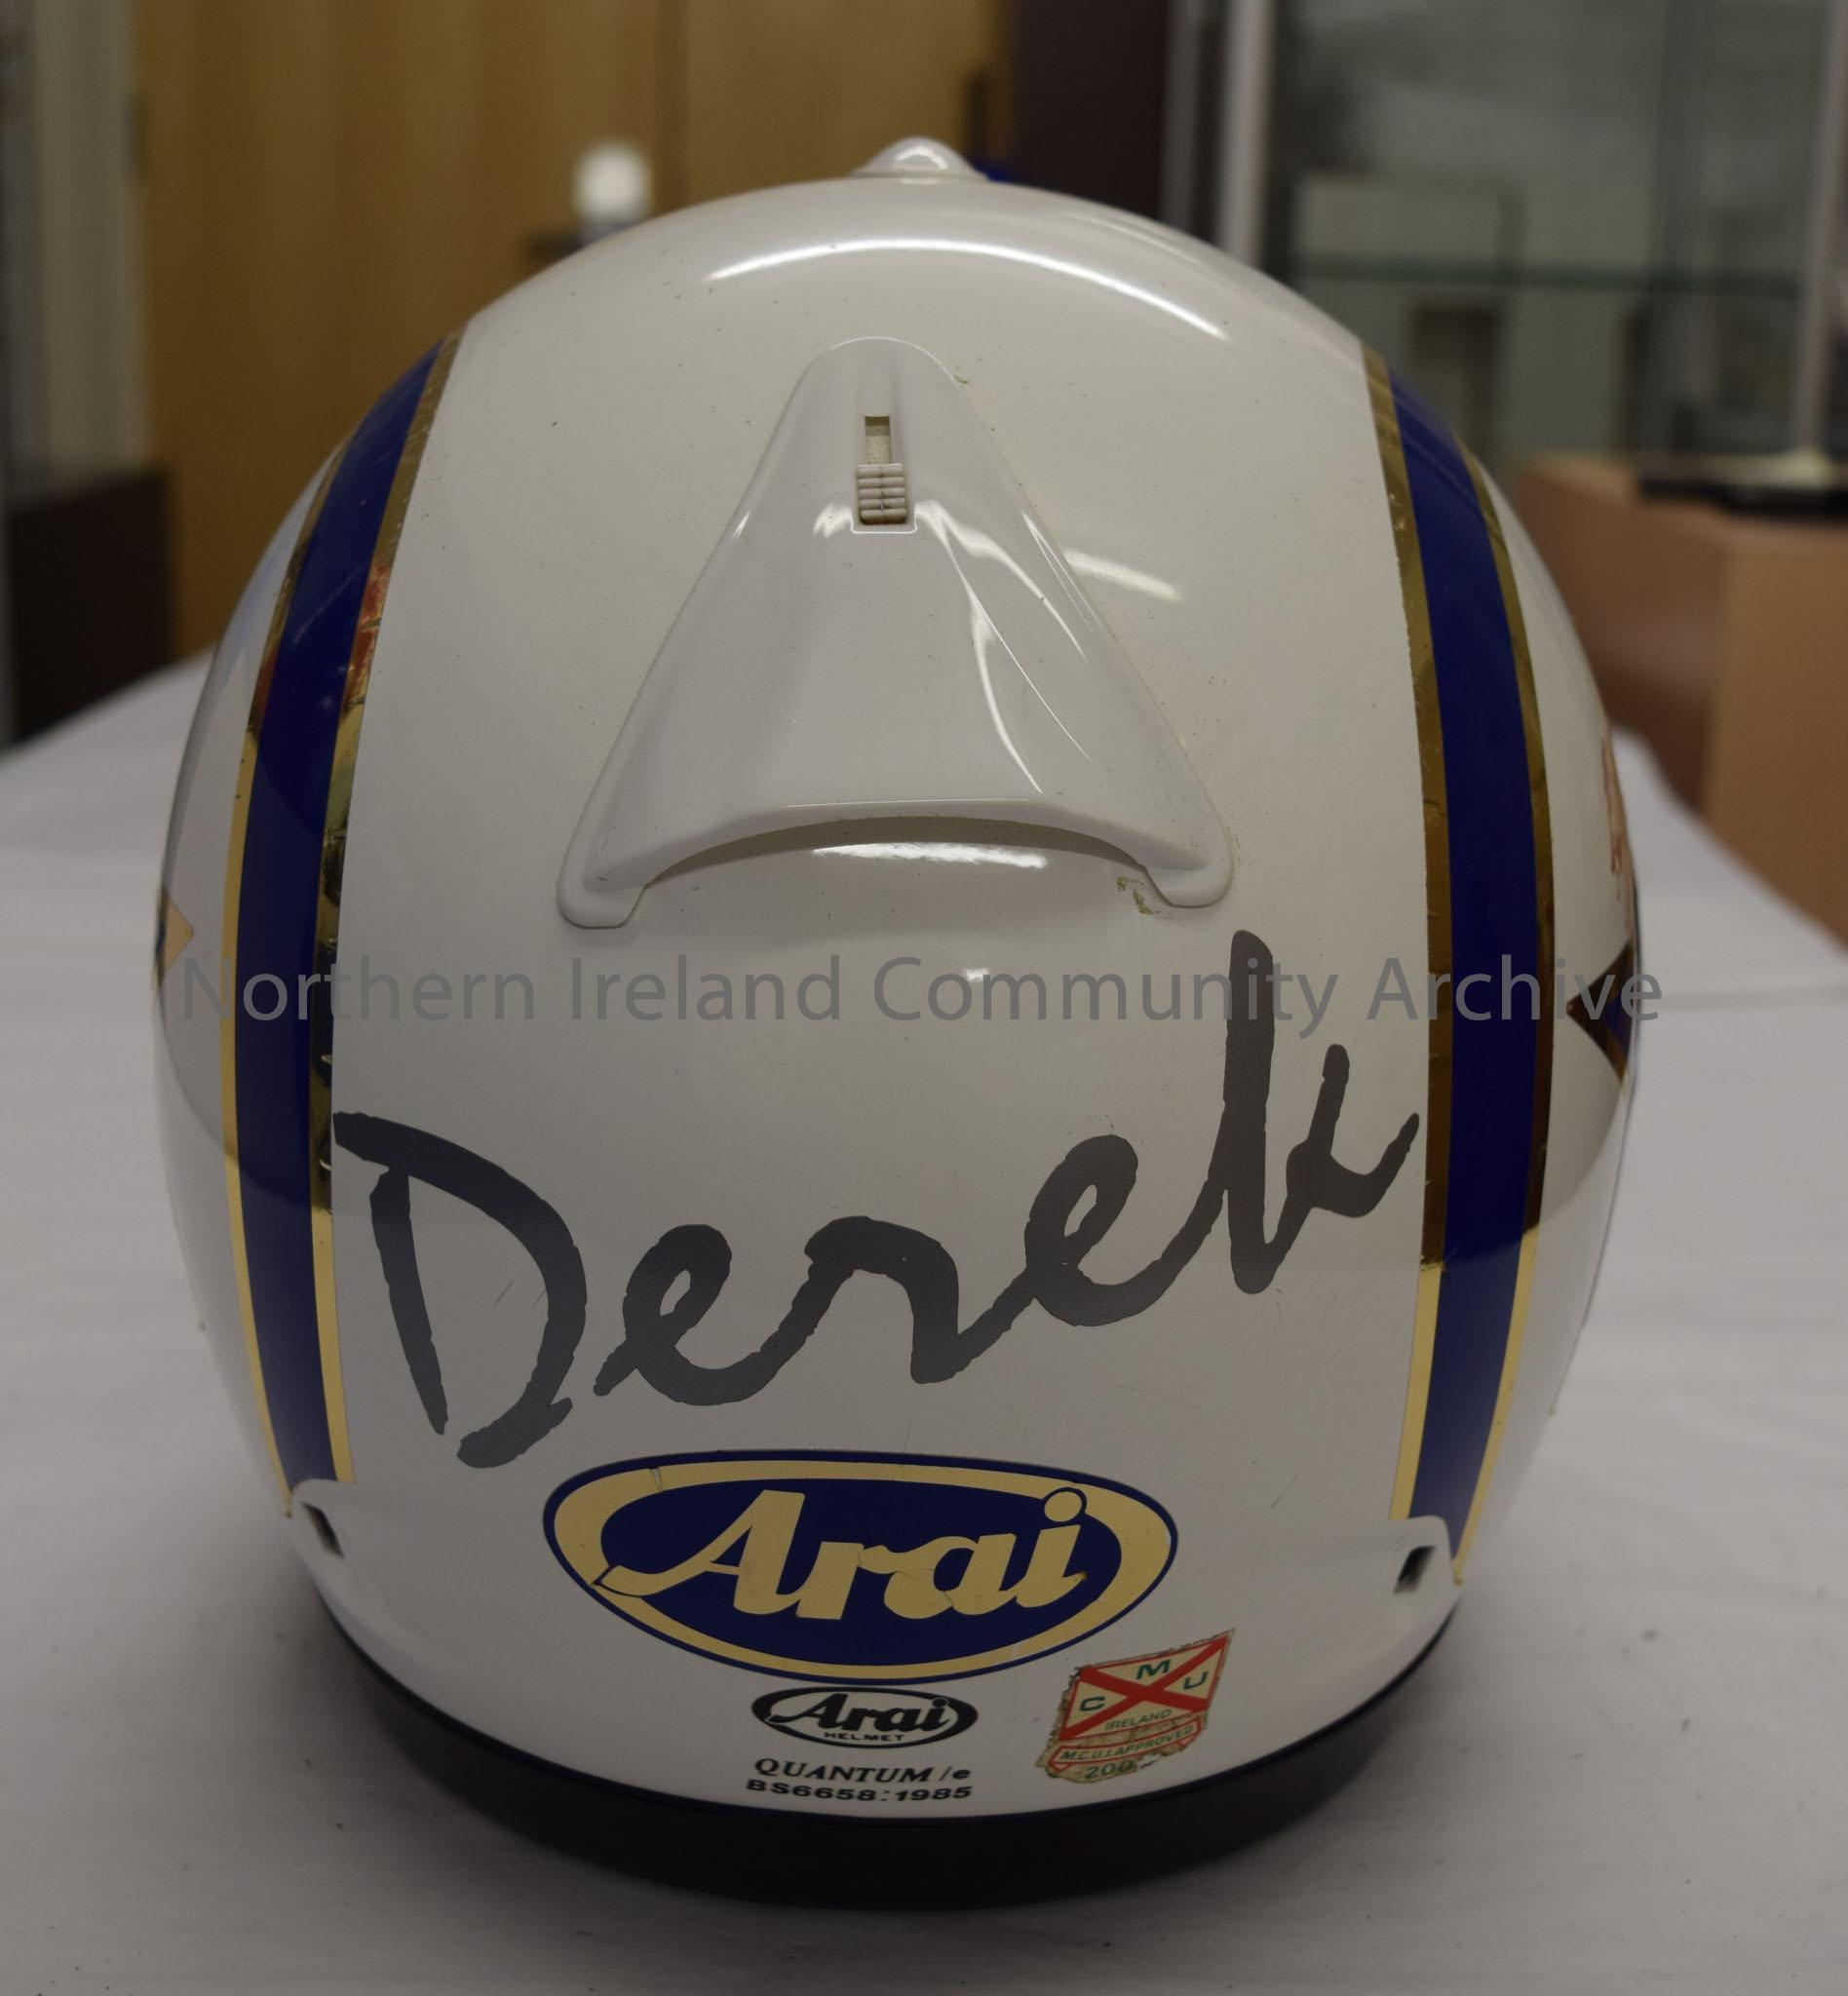 Arai motorcycle helmet belonging to Derek McLaughlin. White with blue and reflective silver stripes down each side and blue and reflective silver star… – 2016.94 (4)